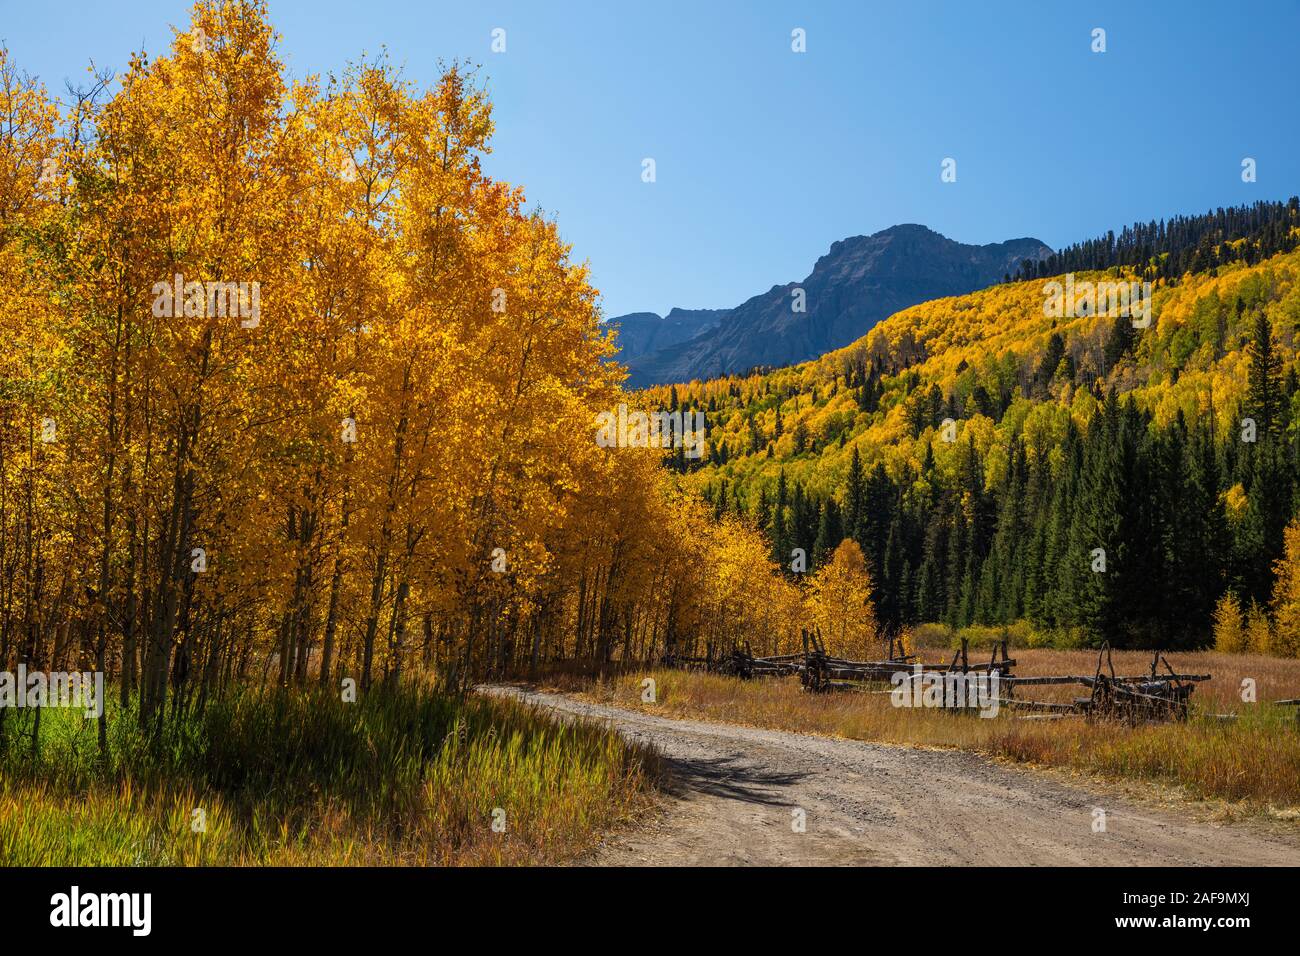 Aspens and fence in autumn, County Road 7, Sneffels Range, San Juan Mountains, Colorado Stock Photo